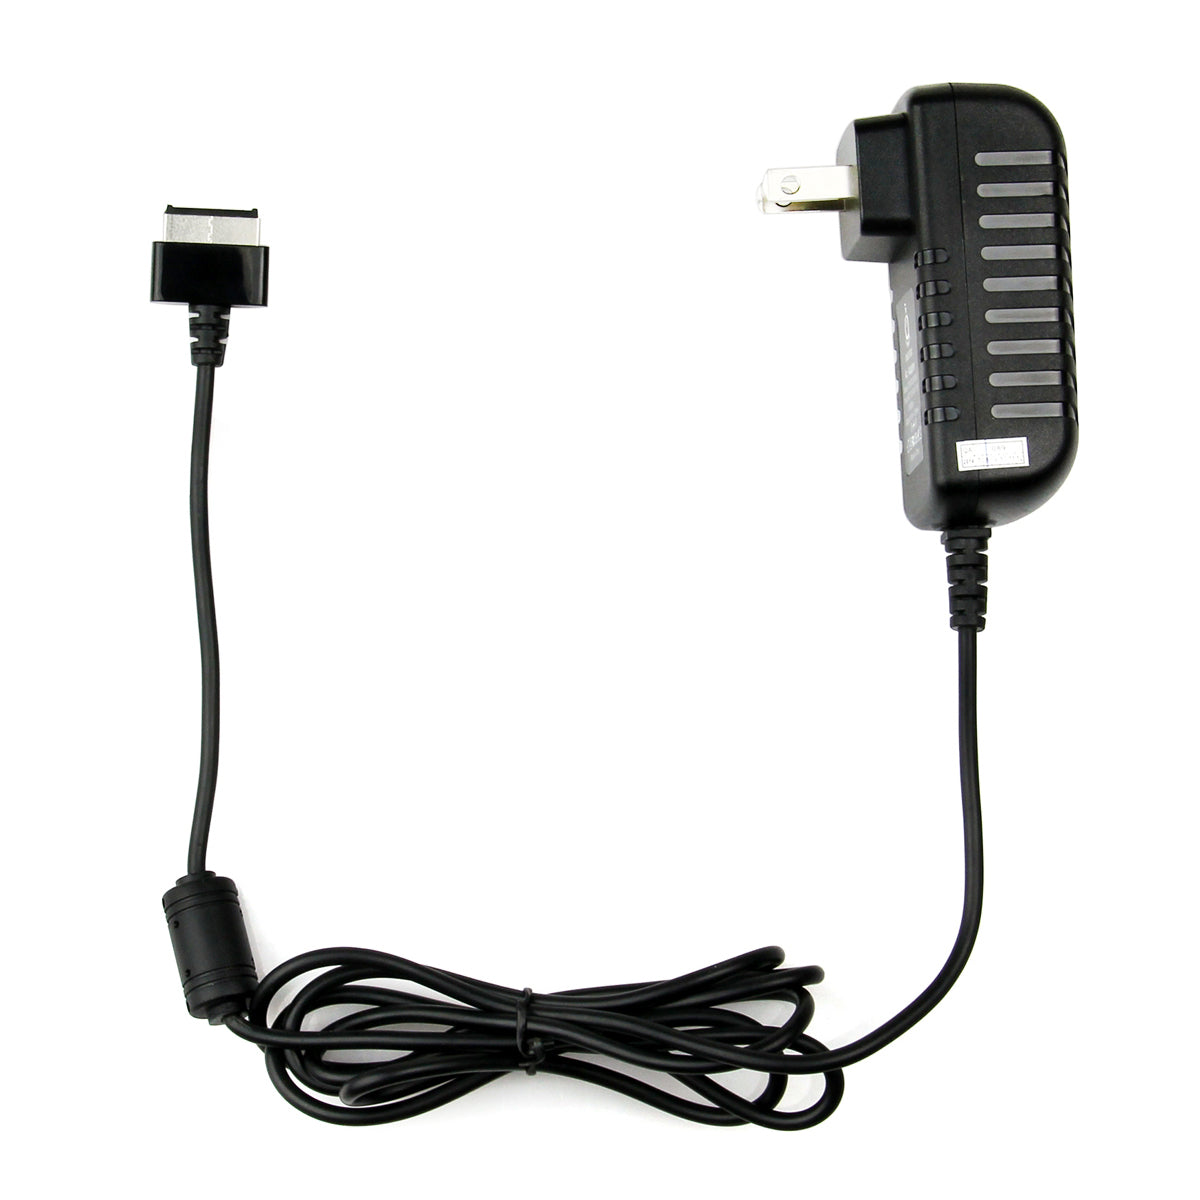 AC Adapter Charger for ASUS TF101RF-B1 Tablet.